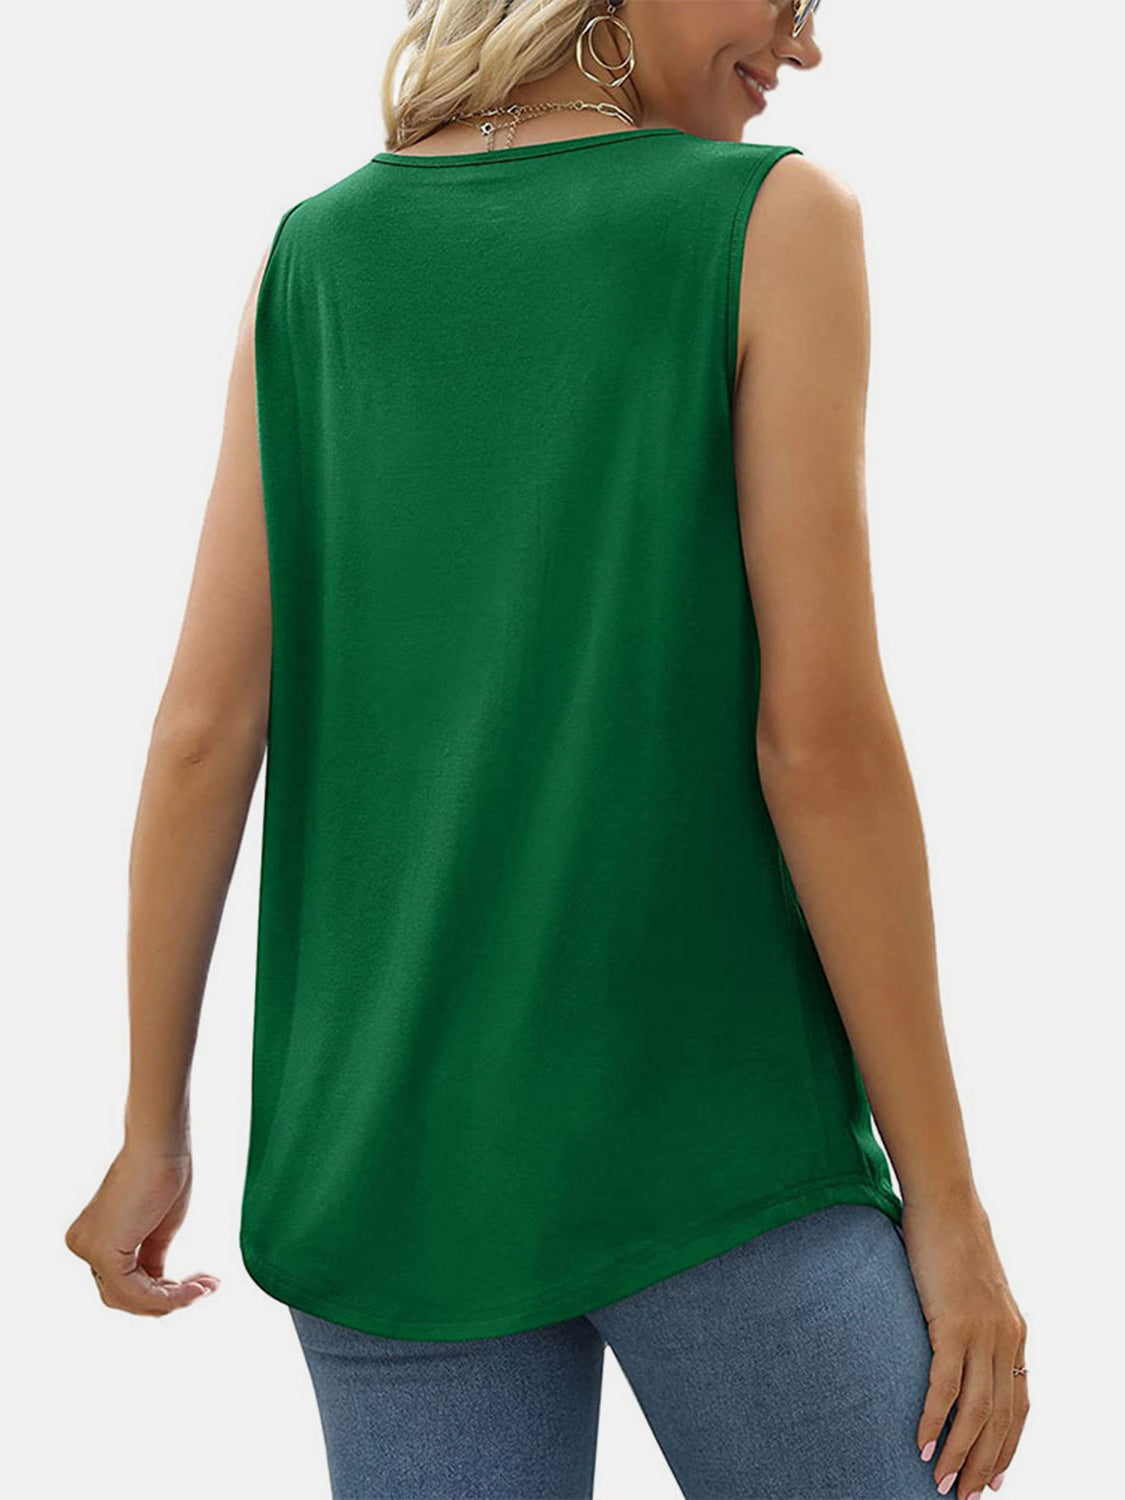 Ruched Square Neck Tank apparel & accessories